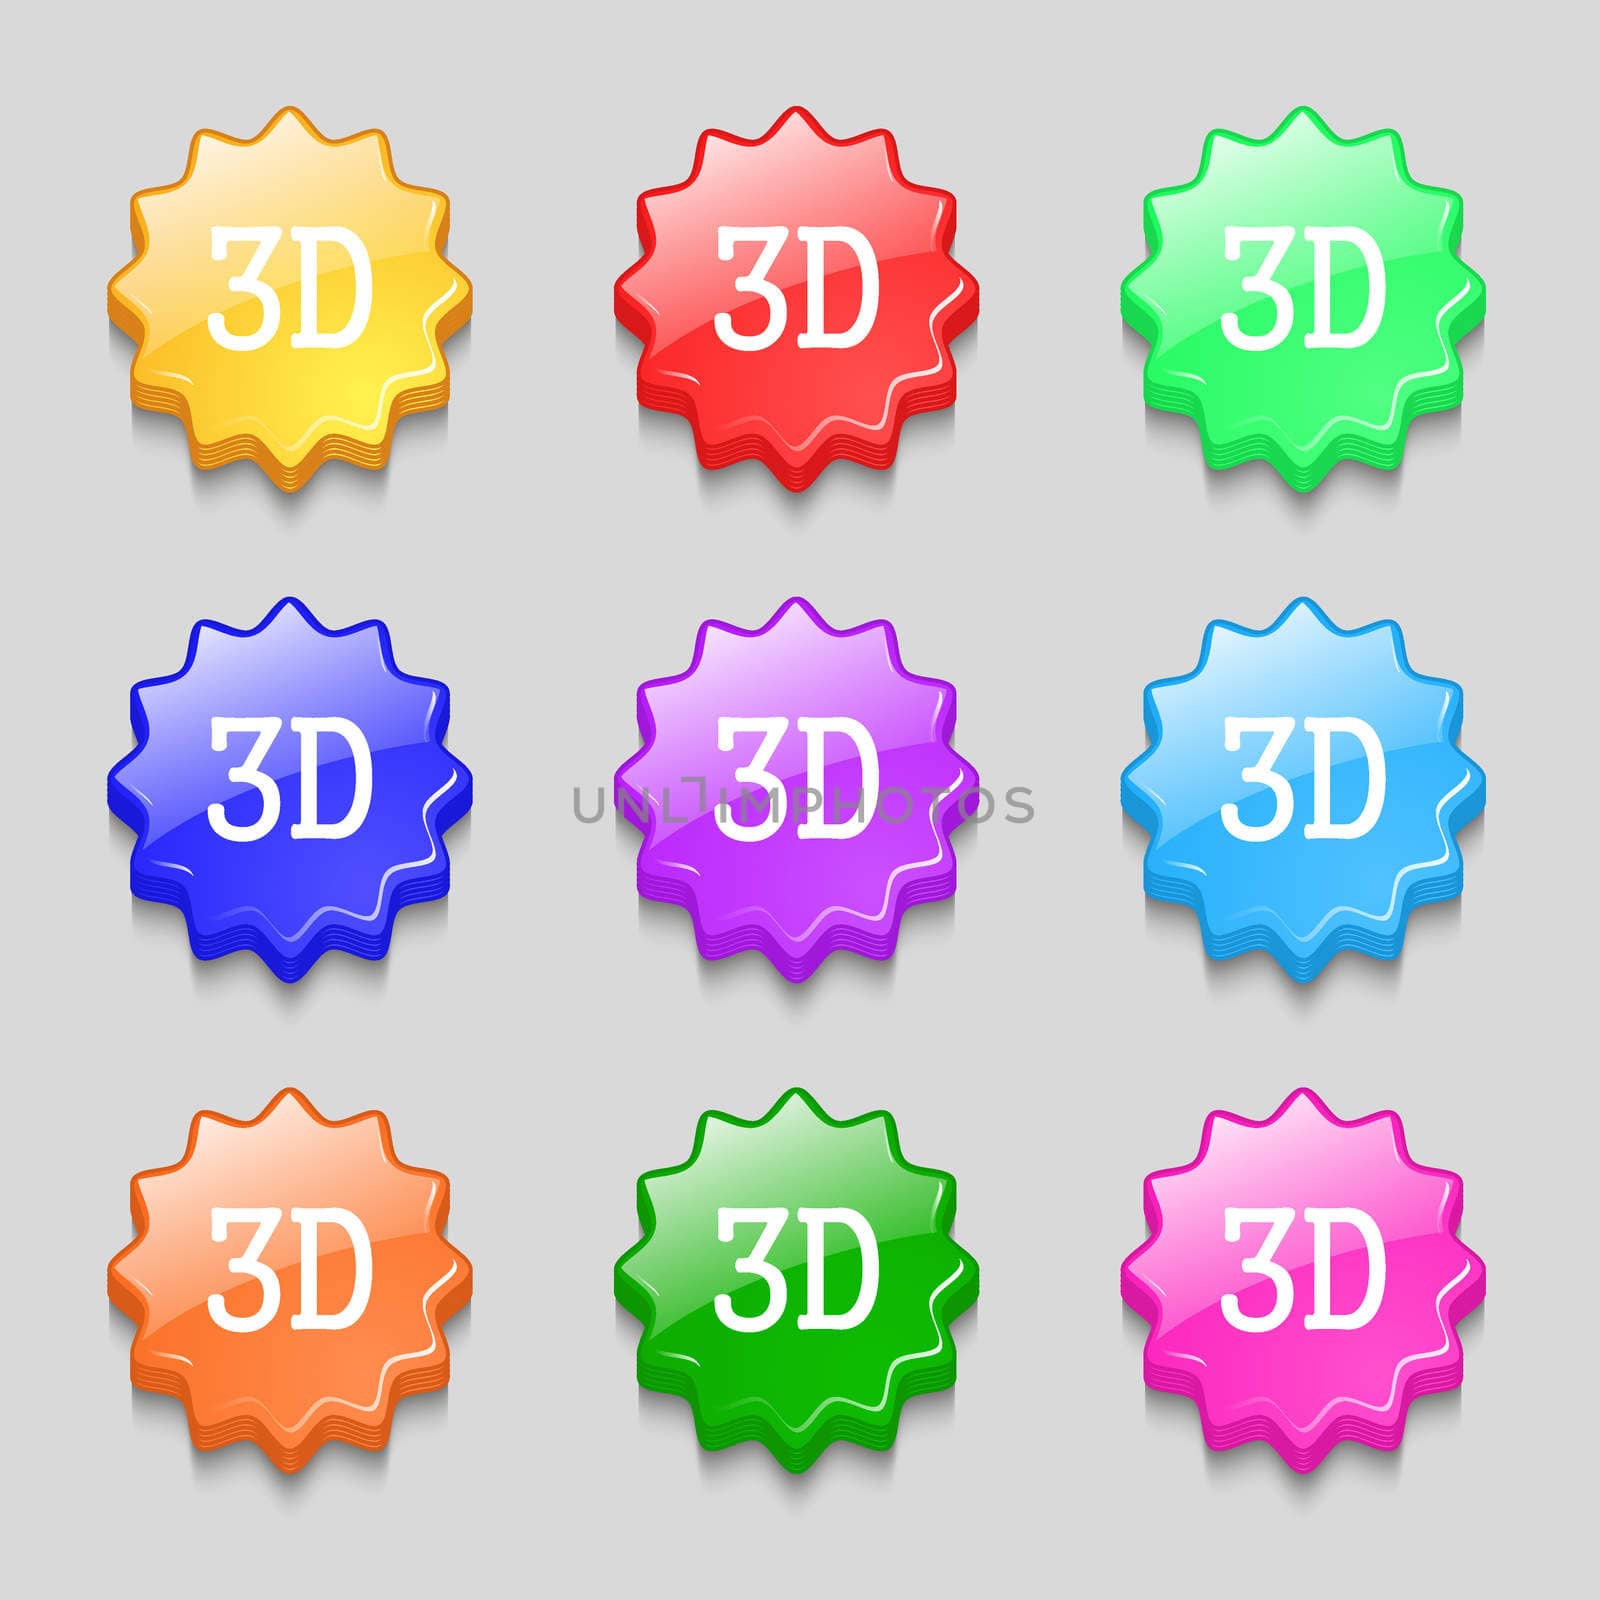 3D sign icon. 3D New technology symbol. Symbols on nine wavy colourful buttons. illustration